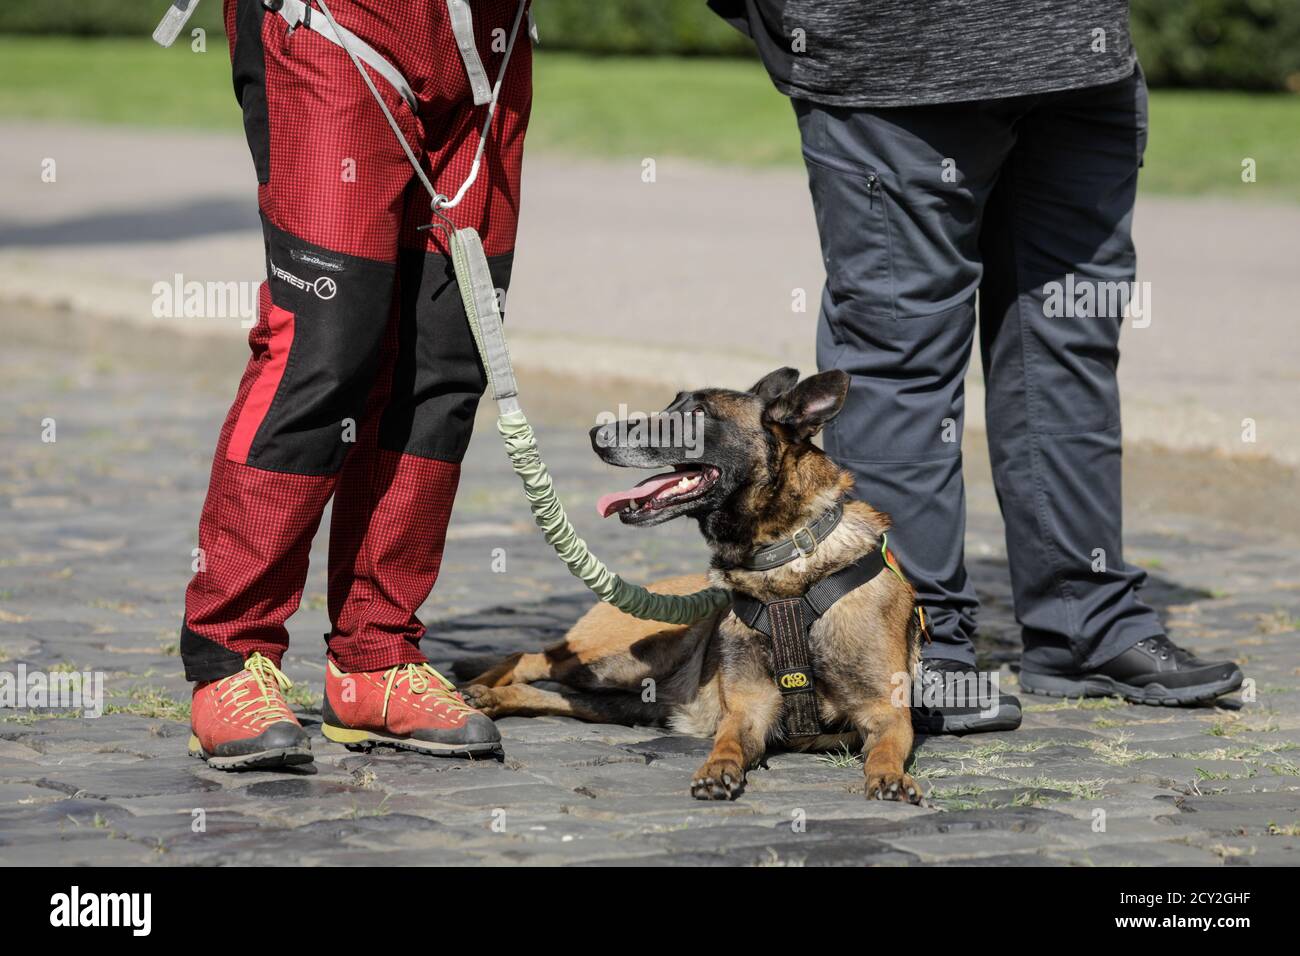 Bucharest, Romania - September 14, 2020: Search and rescue dog with his owner. Stock Photo